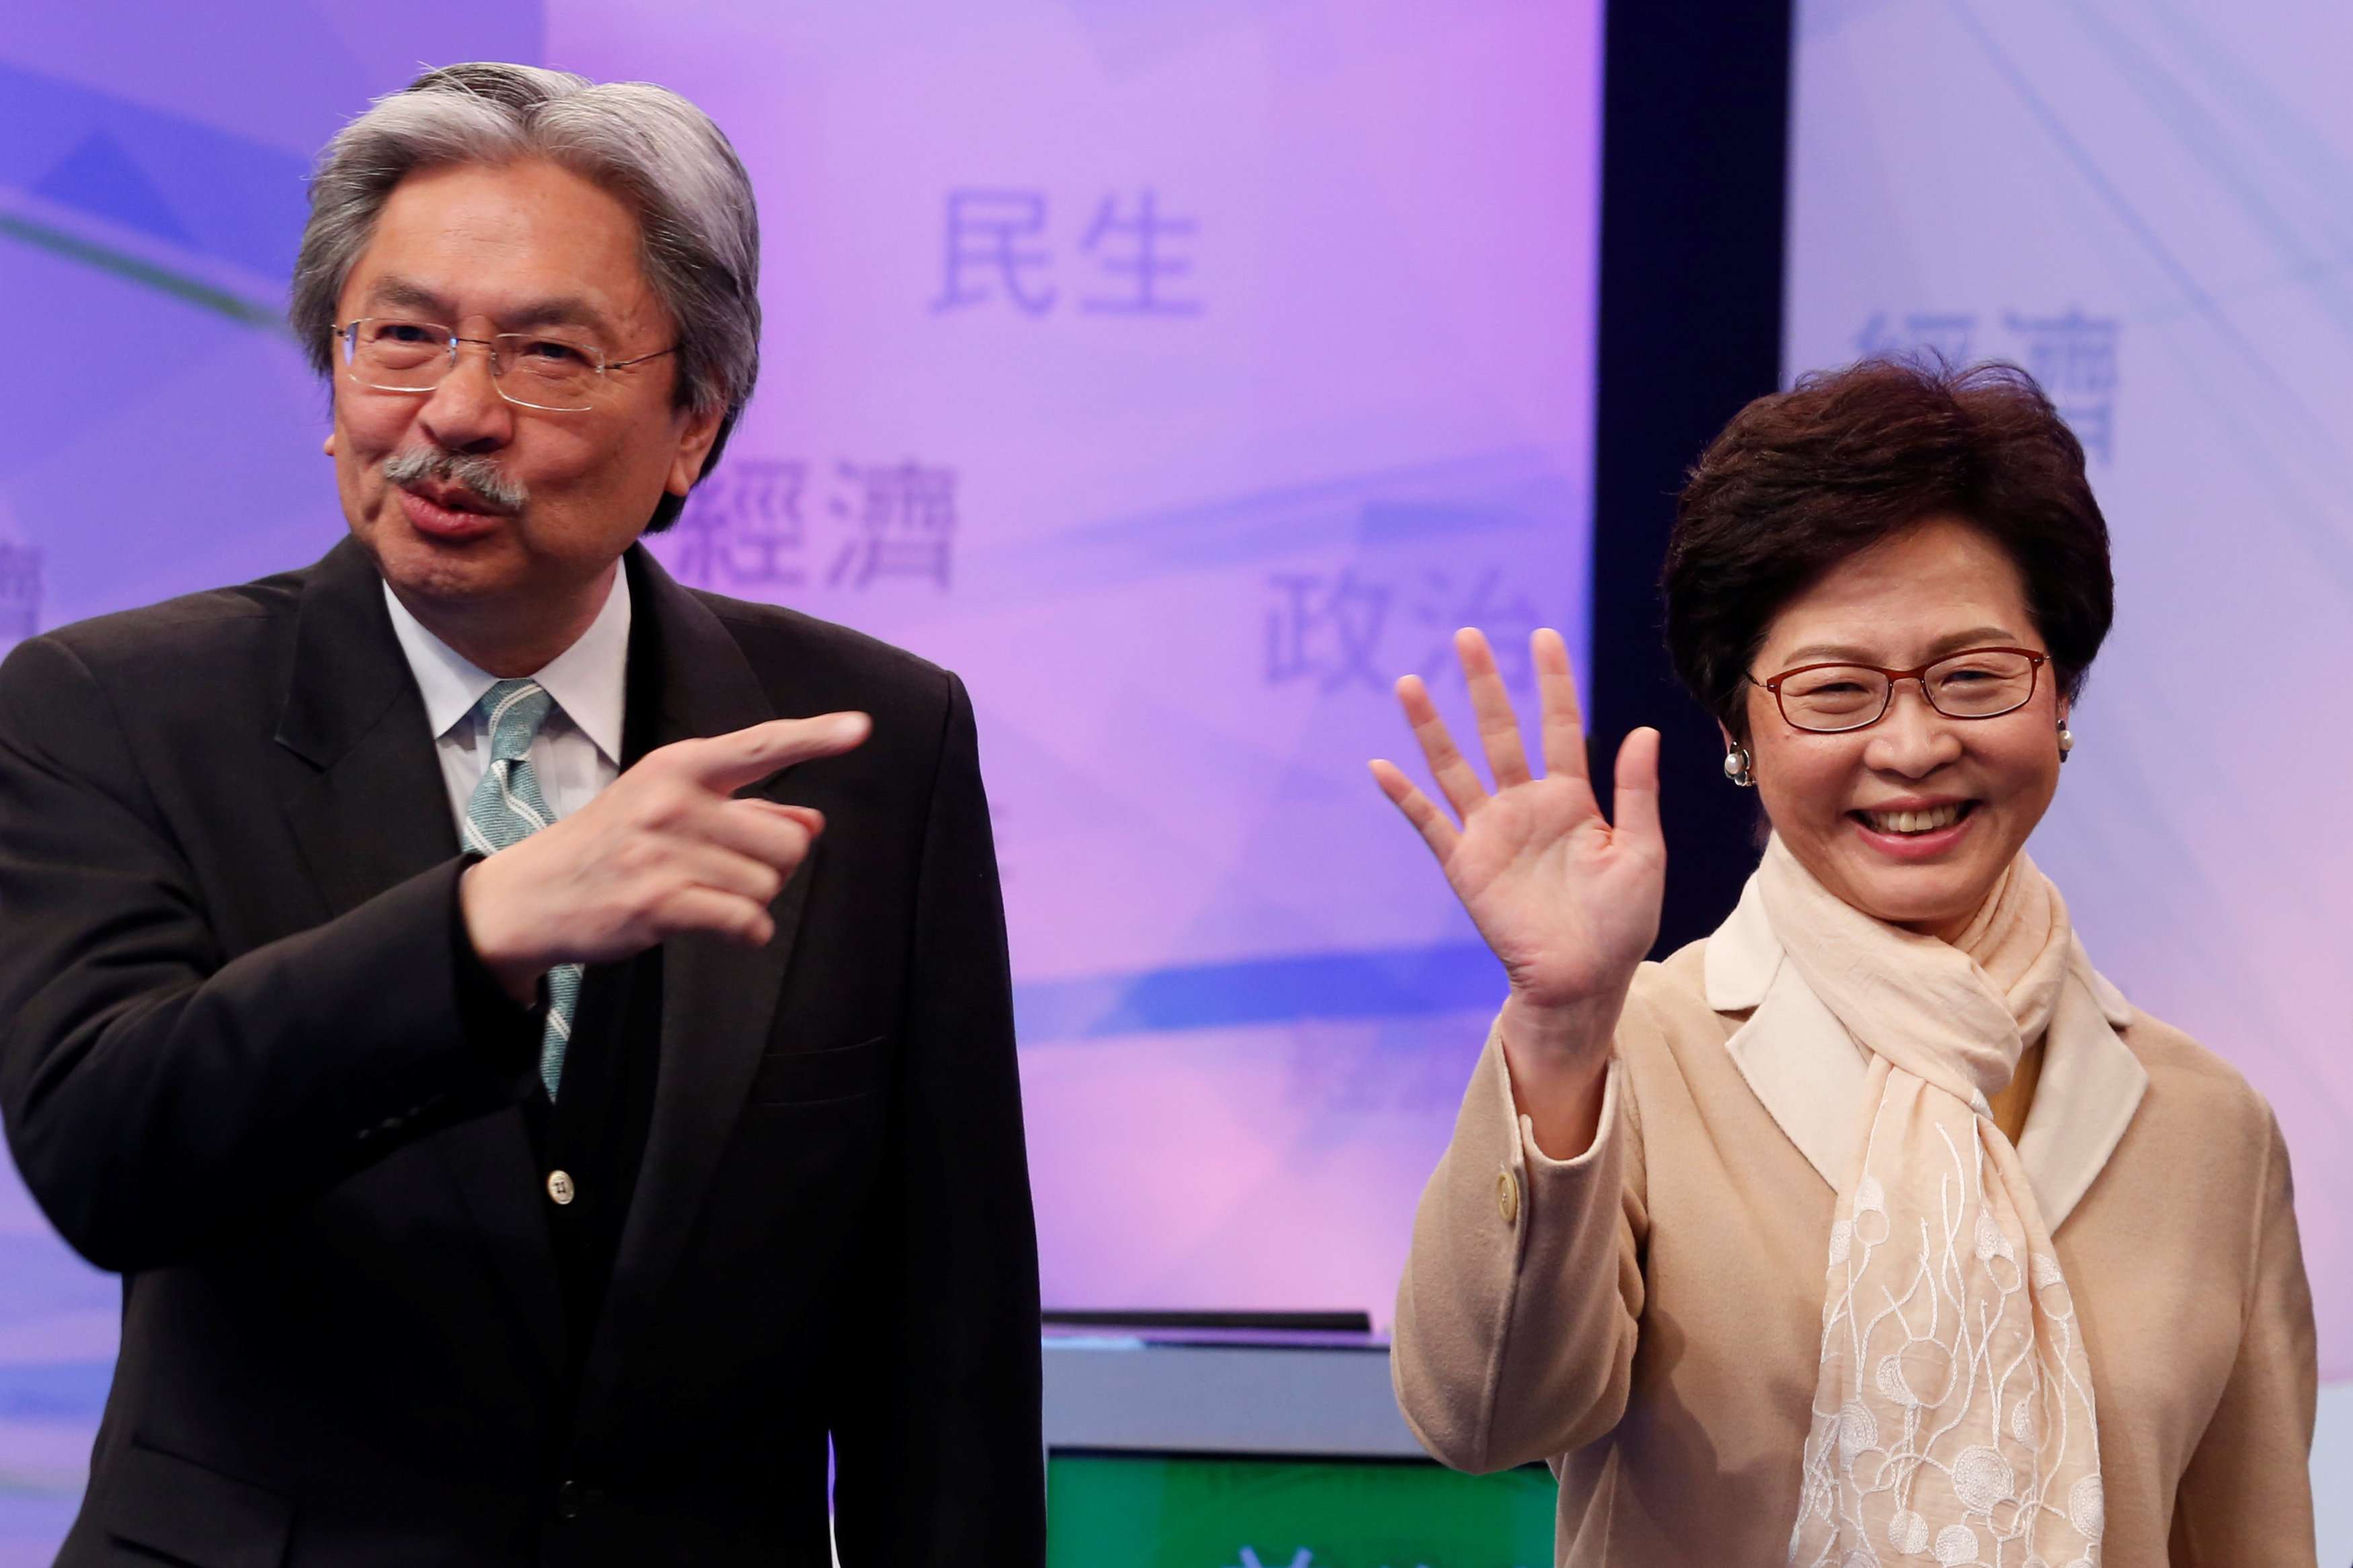 Chief executive candidates John Tsang and Carrie Lam attend an election debate on Tuesday. Beijing has made known its preferences through various channels from an early stage – no to Tsang, the former financial secretary who is leading in the opinion polls, but full support for former chief secretary Lam, the likely winner. Photo: Reuters